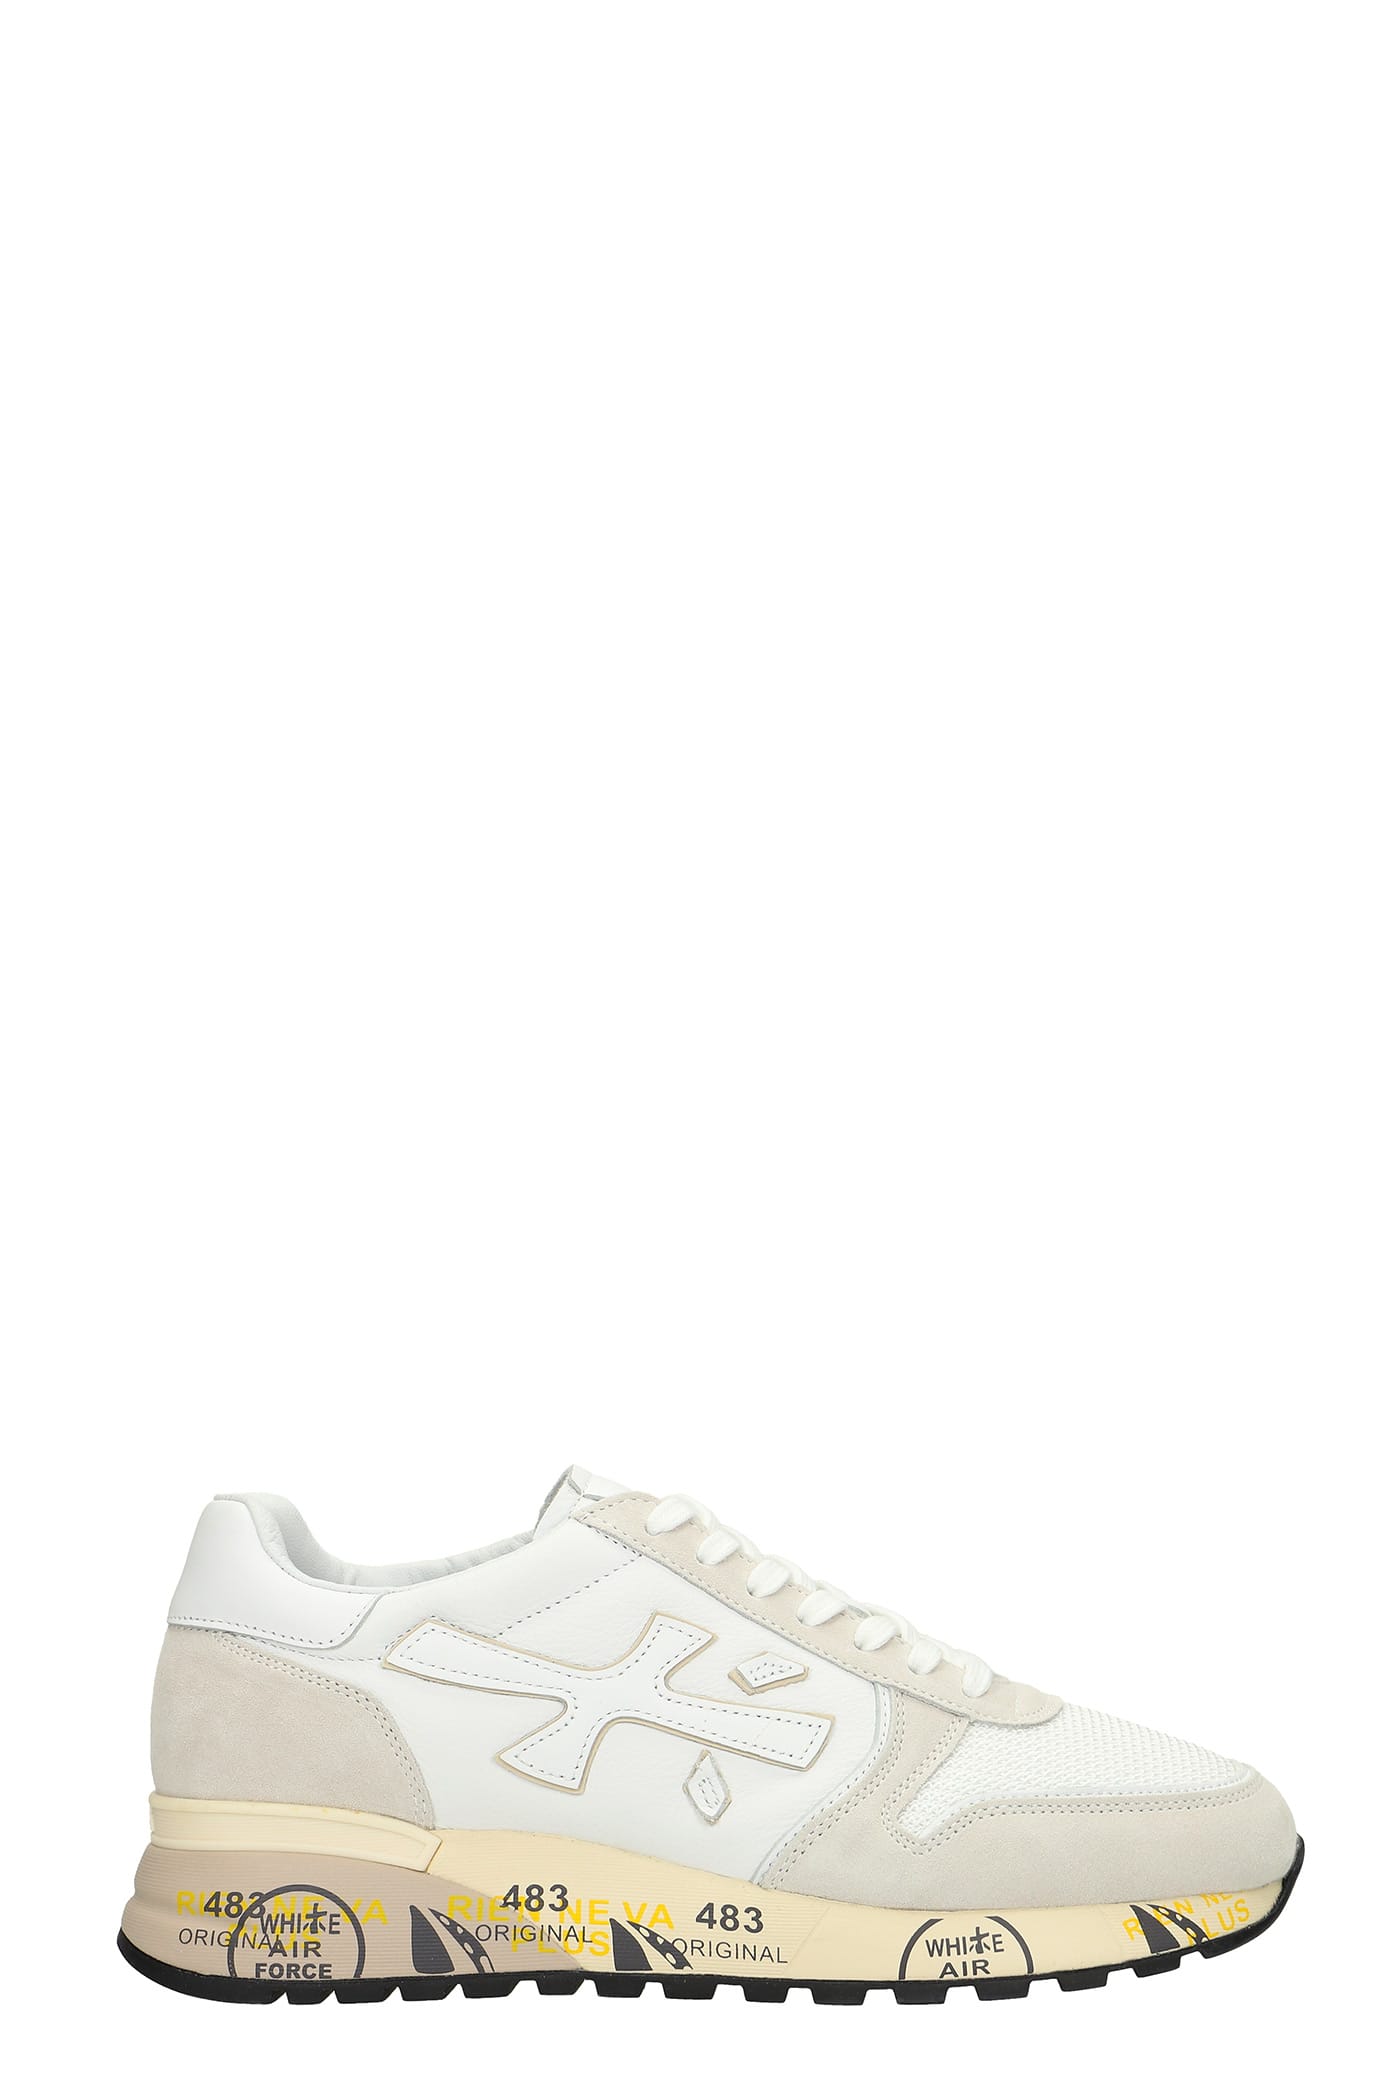 Premiata Mick Sneakers In White Suede And Leather